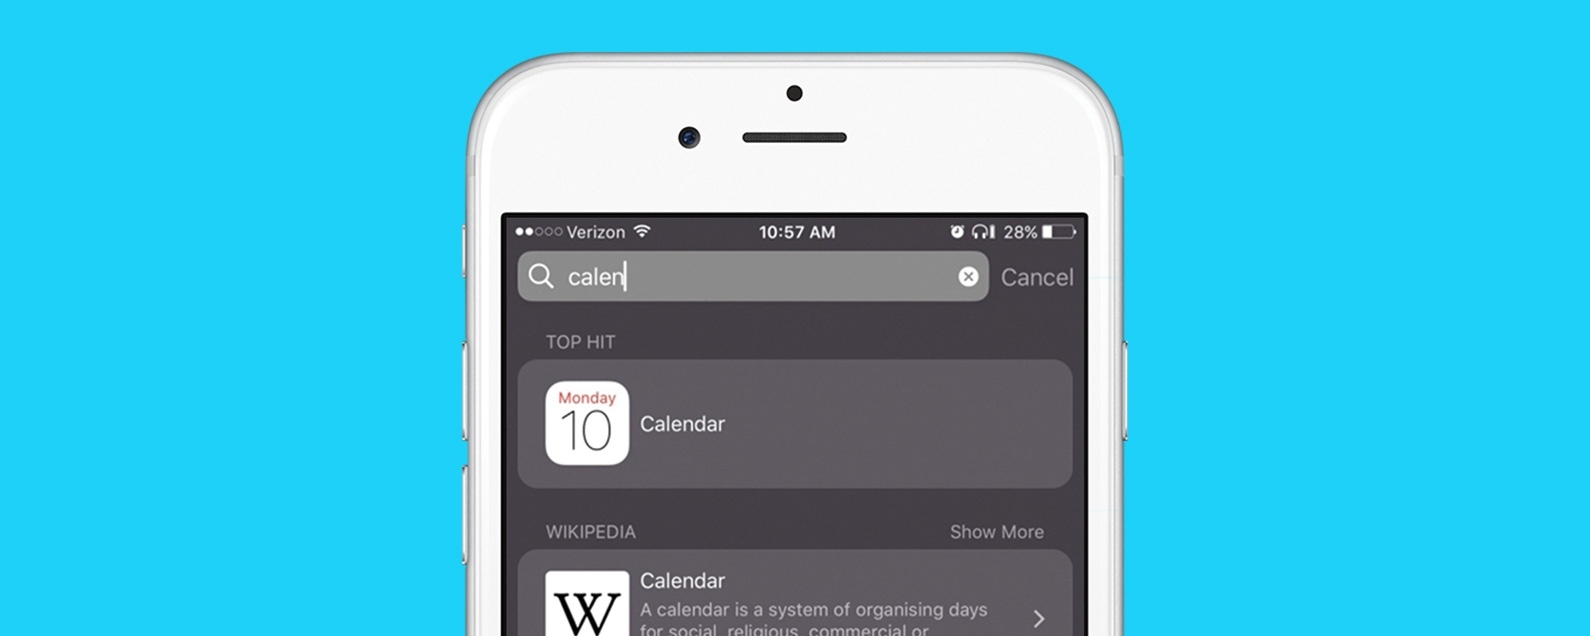 Iphone Calendar Disappeared? How To Get It Back On Your Iphone The Calendar Icon On My Iphone Disappeared